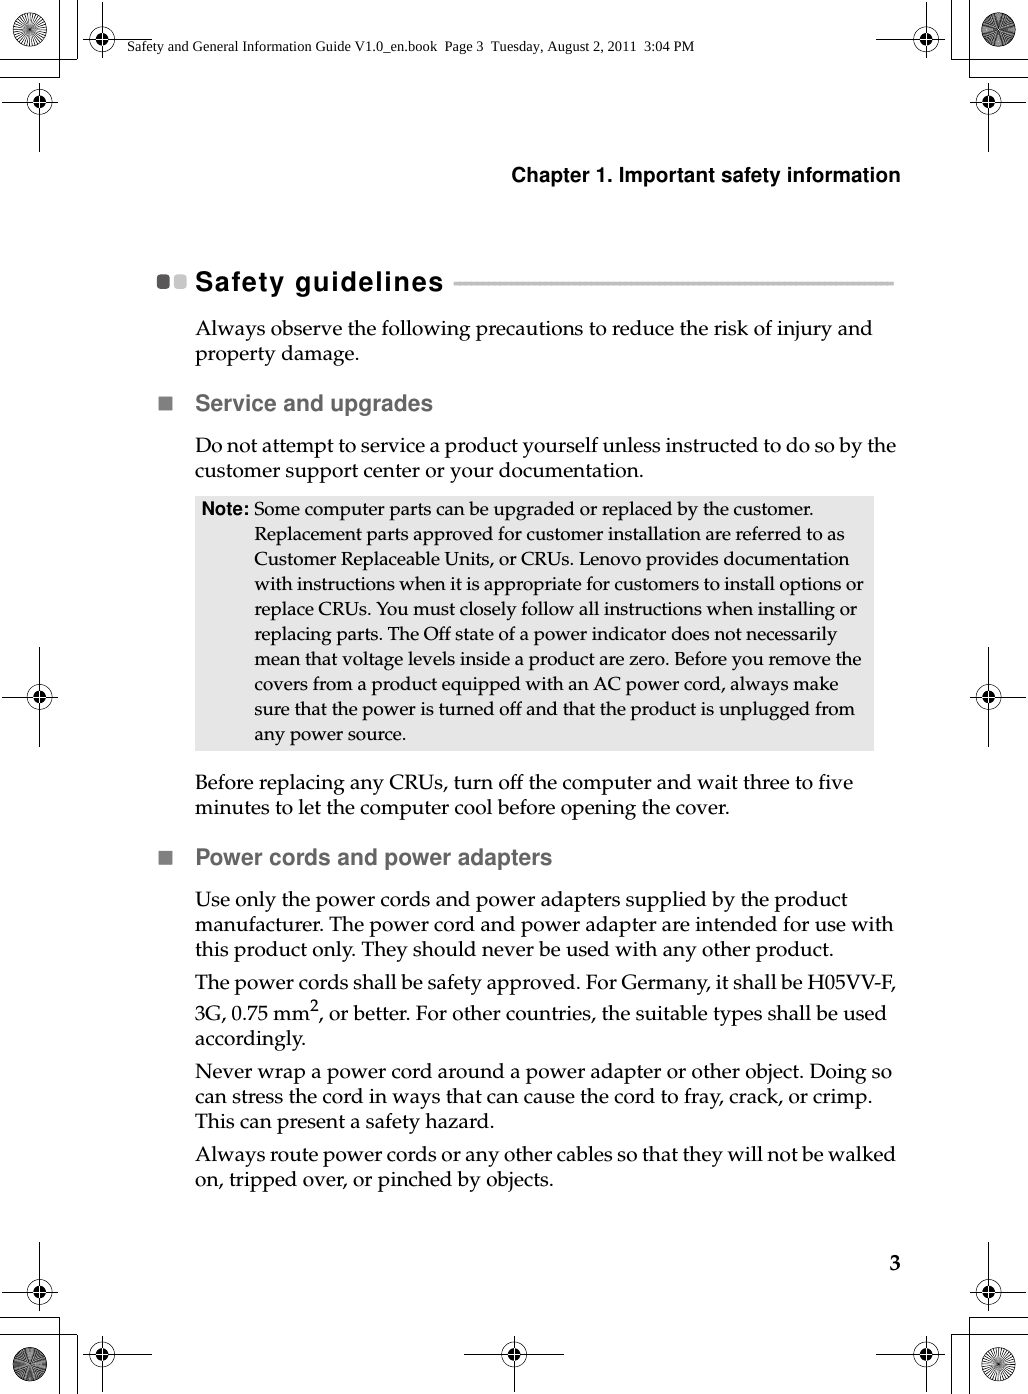 Chapter 1. Important safety information3Safety guidelines  - - - - - - - - - - - - - - - - - - - - - - - - - - - - - - - - - - - - - - - - - - - - - - - - - - - - - - - - - - - - - - - - - - - - - - - - - - - - - Always observe the following precautions to reduce the risk of injury and property damage. Service and upgradesDo not attempt to service a product yourself unless instructed to do so by the customer support center or your documentation. Before replacing any CRUs, turn off the computer and wait three to five minutes to let the computer cool before opening the cover.Power cords and power adaptersUse only the power cords and power adapters supplied by the product manufacturer. The power cord and power adapter are intended for use with this product only. They should never be used with any other product.The power cords shall be safety approved. For Germany,  it shall be H05VV-F, 3G, 0.75 mm2, or better. For other countries, the suitable types shall be used accordingly.Never wrap a power cord around a power adapter or other object. Doing so can stress the cord in ways that can cause the cord to fray, crack, or crimp. This can present a safety hazard.Always route power cords or any other cables so that they will not be walked on, tripped over, or pinched by objects.Note: Some computer parts can be upgraded or replaced by the customer. Replacement parts approved for customer installation are referred to as Customer Replaceable Units, or CRUs. Lenovo provides documentation with instructions when it is appropriate for customers to install options or replace CRUs. You must closely follow all instructions when installing or replacing parts. The Off state of a power indicator does not necessarily mean that voltage levels inside a product are zero. Before you remove the covers from a product equipped with an AC power cord, always make sure that the power is turned off and that the product is unplugged from any power source.Safety and General Information Guide V1.0_en.book  Page 3  Tuesday, August 2, 2011  3:04 PM